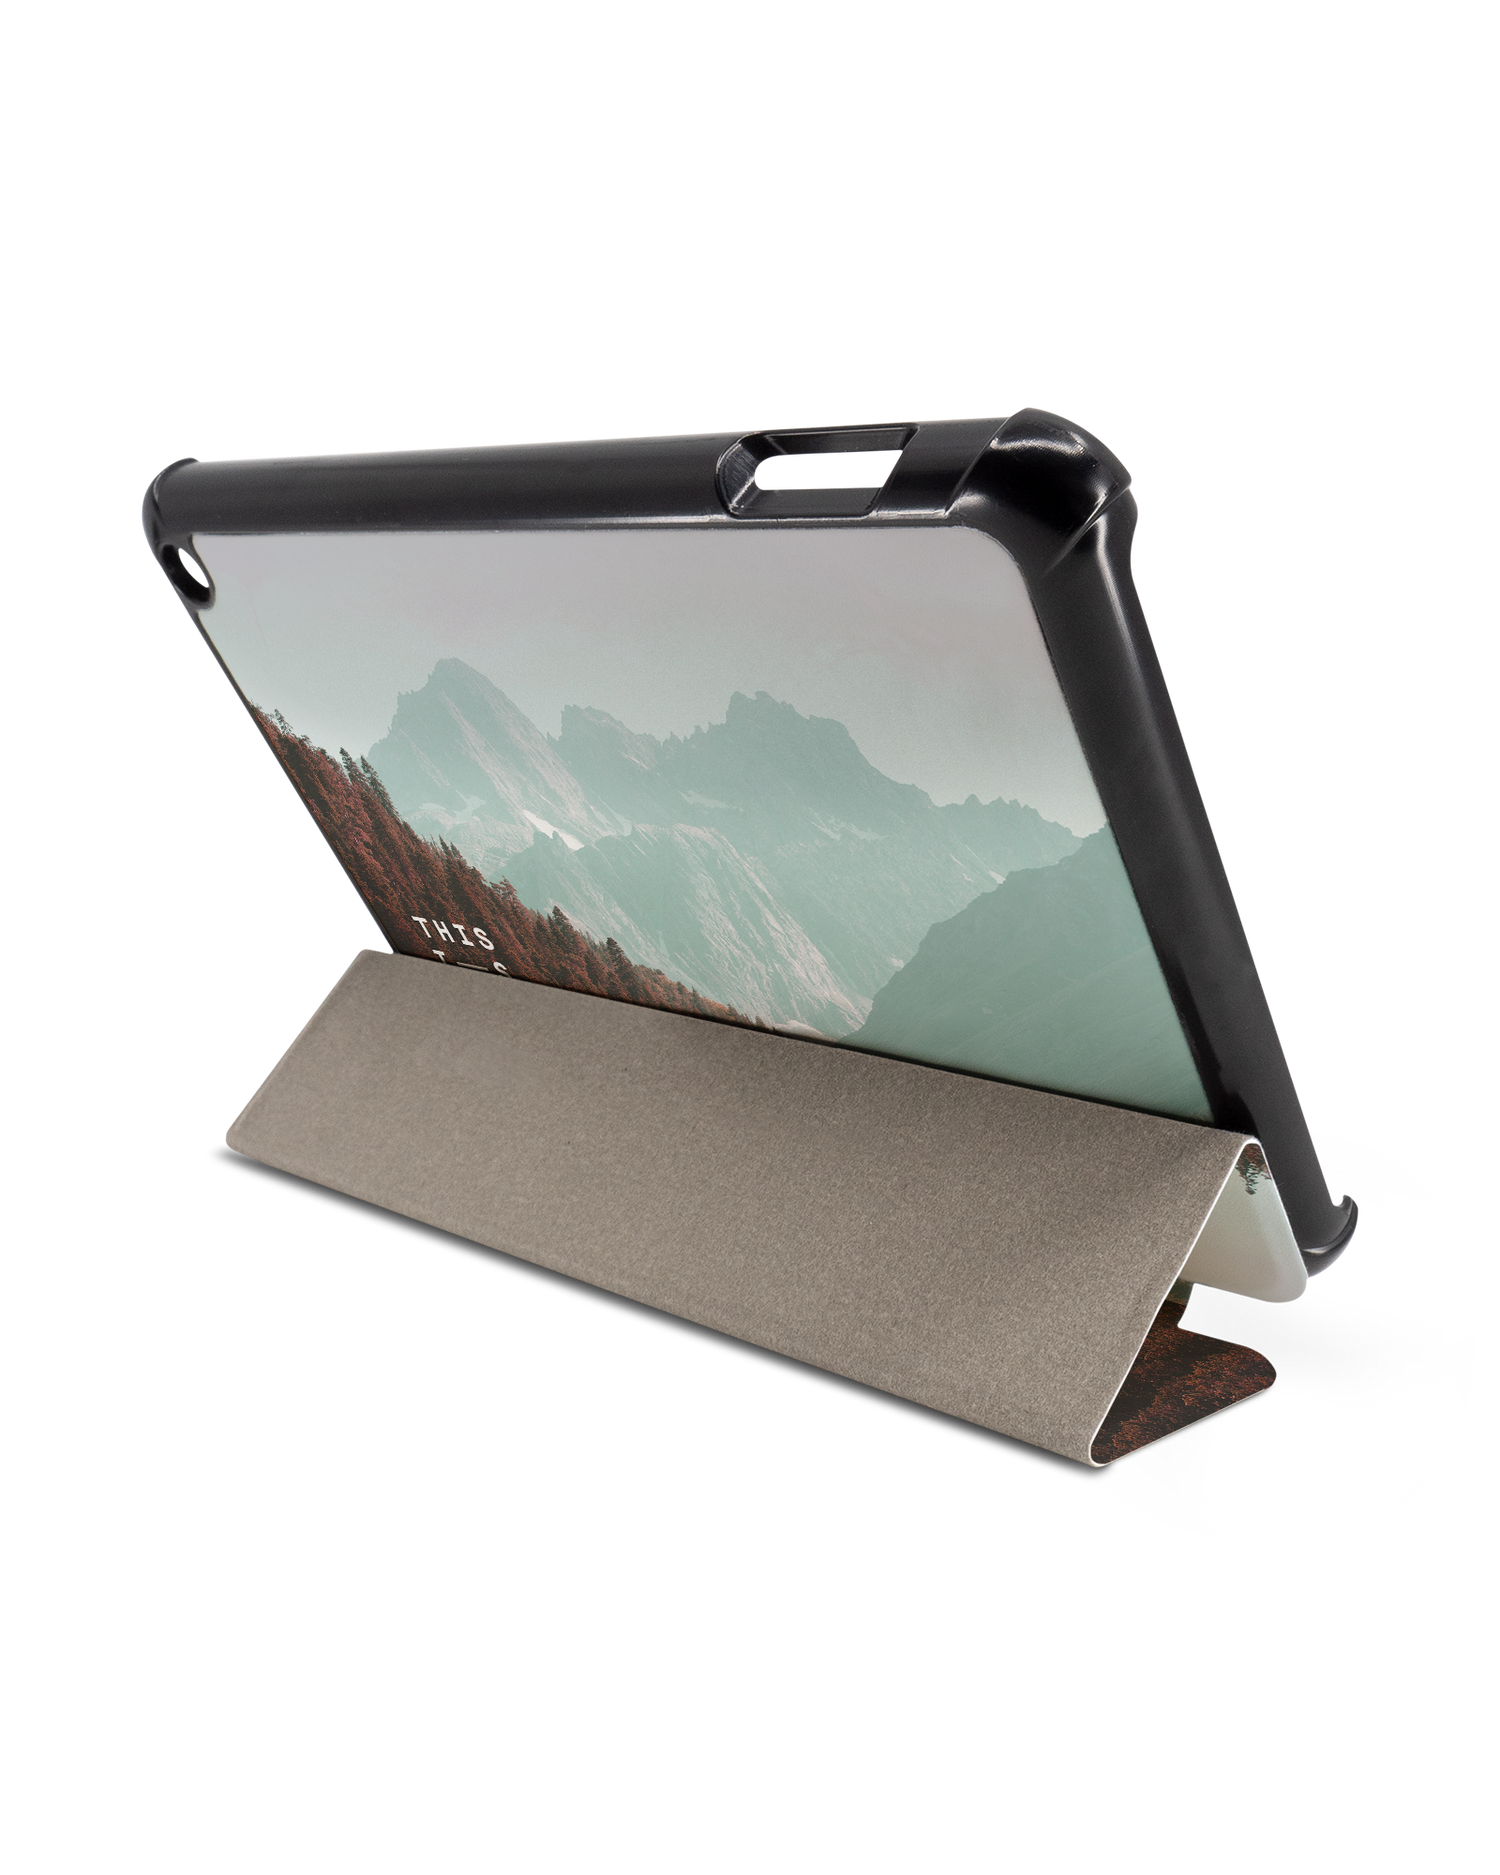 Into the Woods Tablet Smart Case for Amazon Fire 7 (2022): Used as Stand